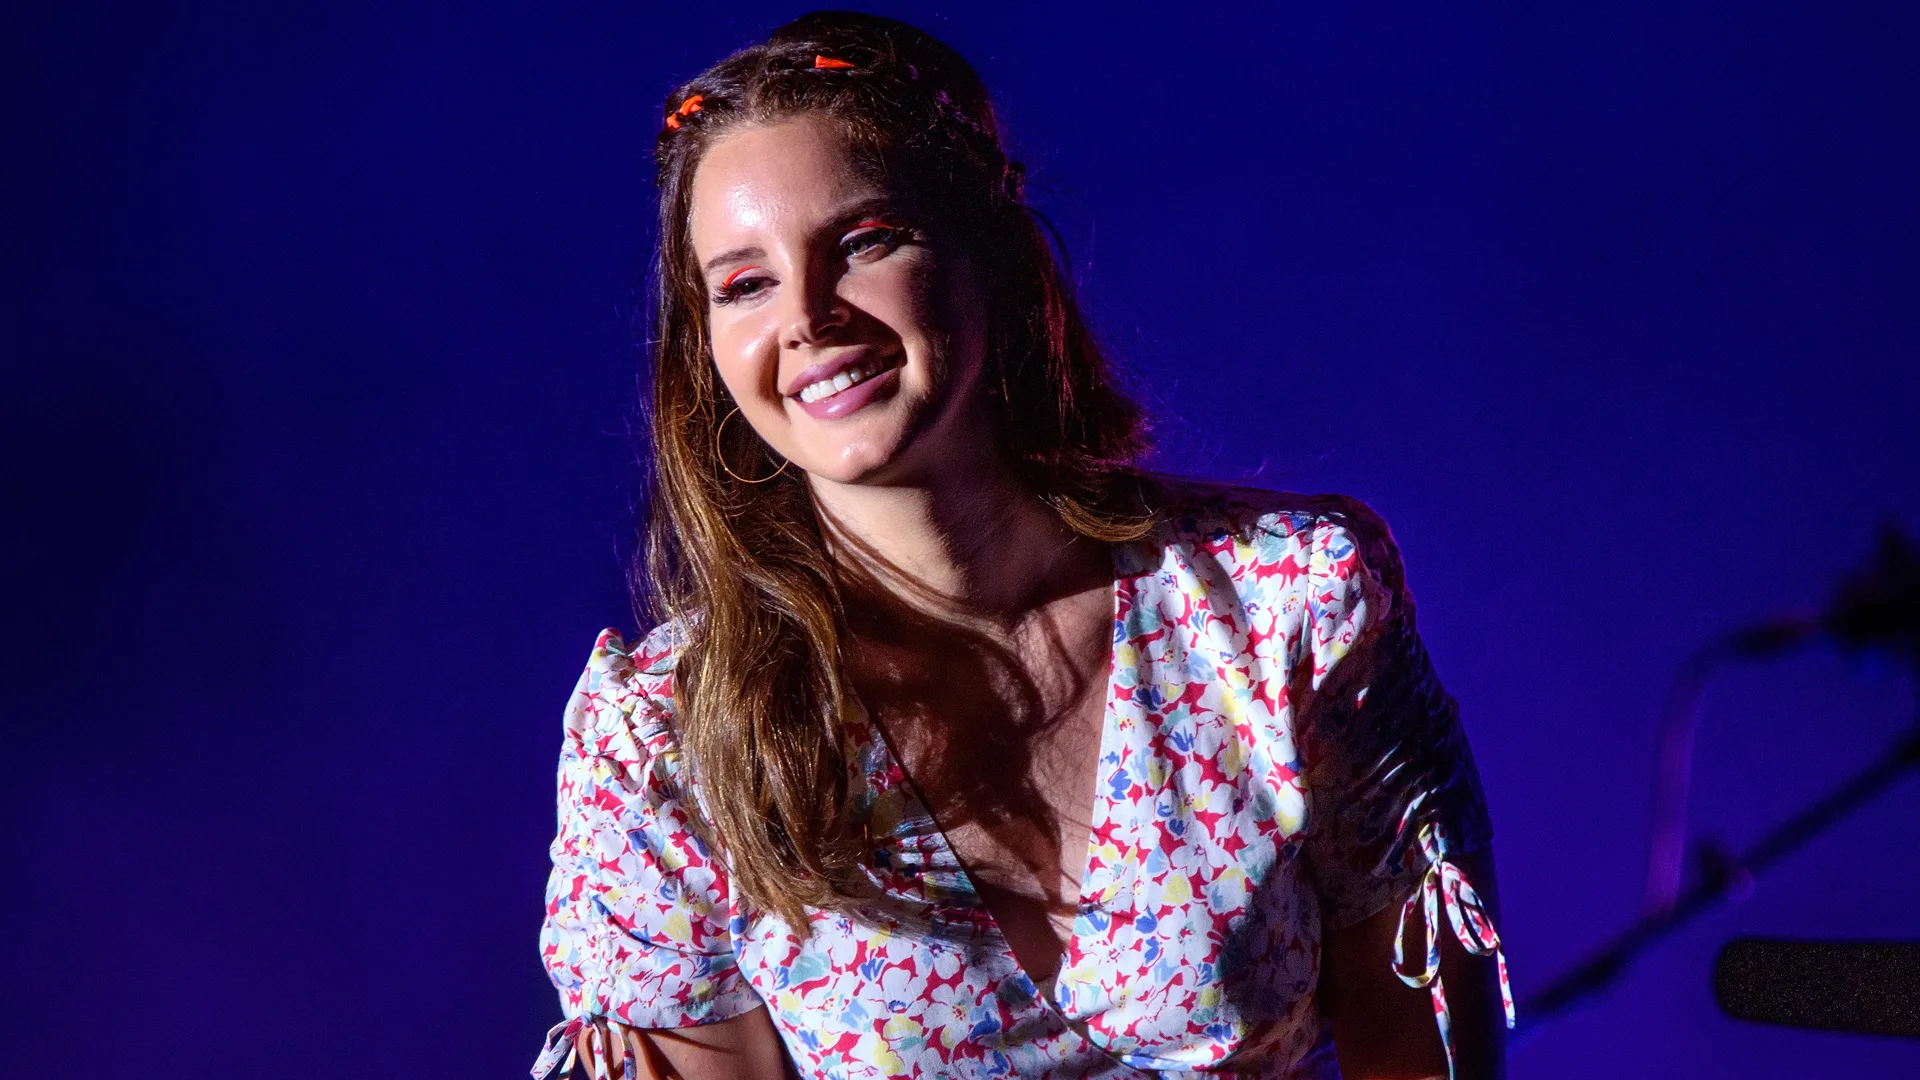 A photograph of Lana Del Ray smiling off camera wearing a floral dress against a dark blue background